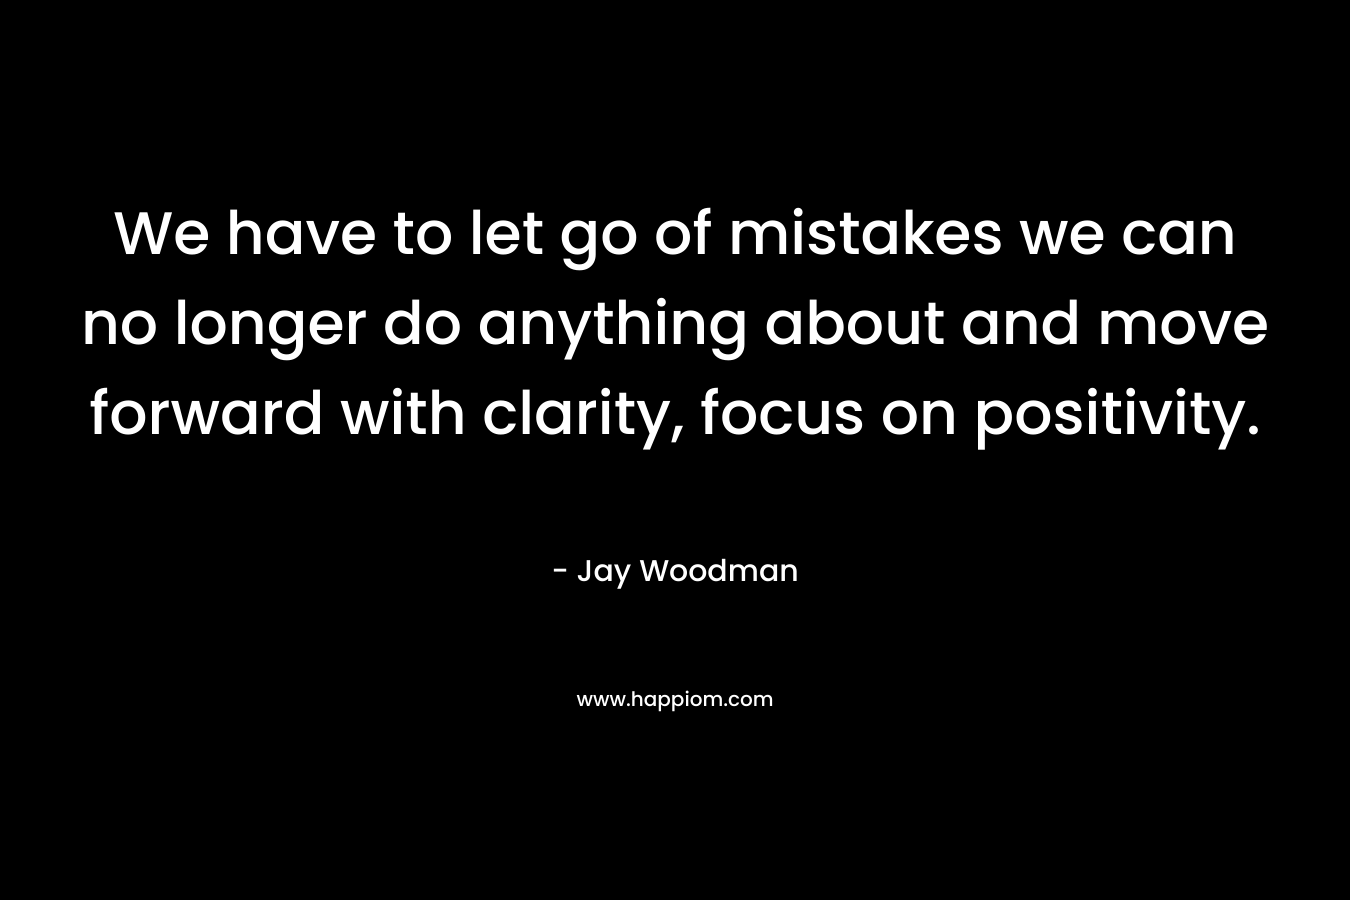 We have to let go of mistakes we can no longer do anything about and move forward with clarity, focus on positivity.